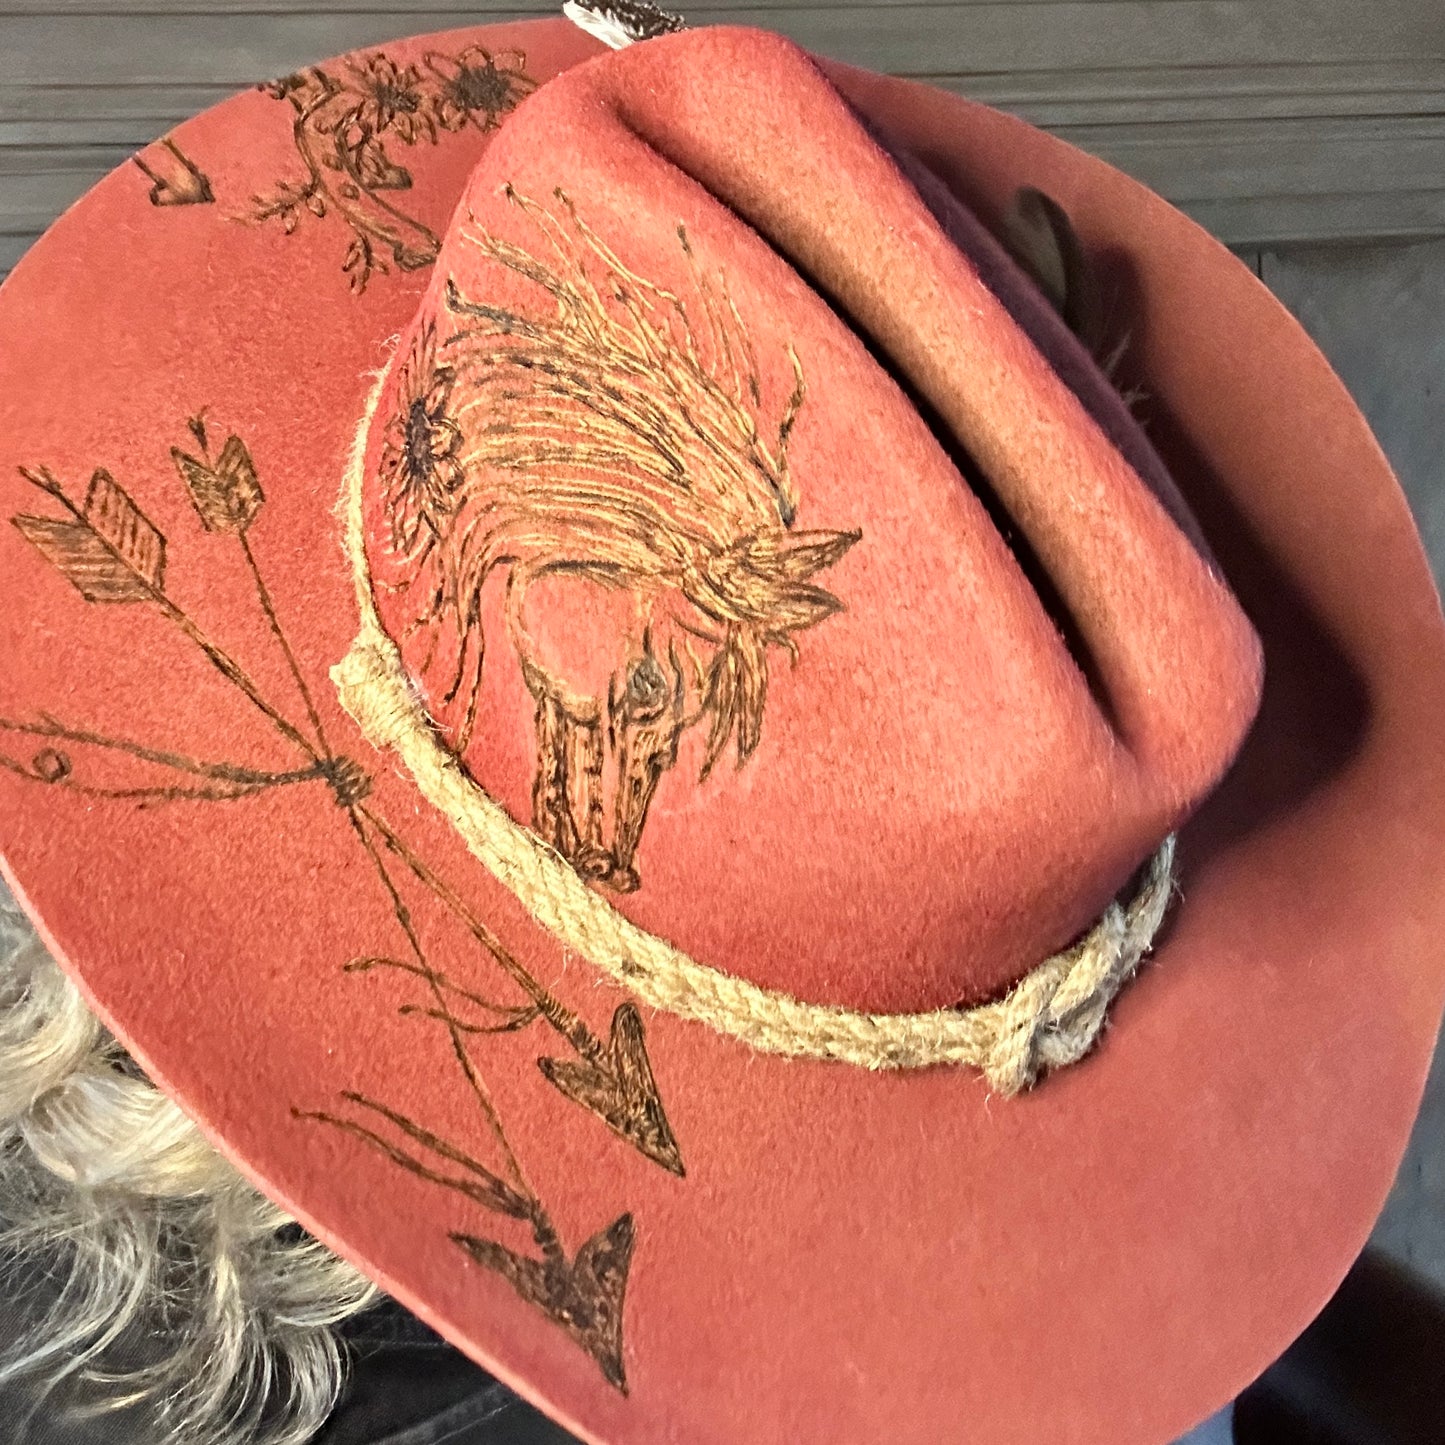 Cowboy Hat Custom Burned by Hand- Red - Bourbon Cowgirl